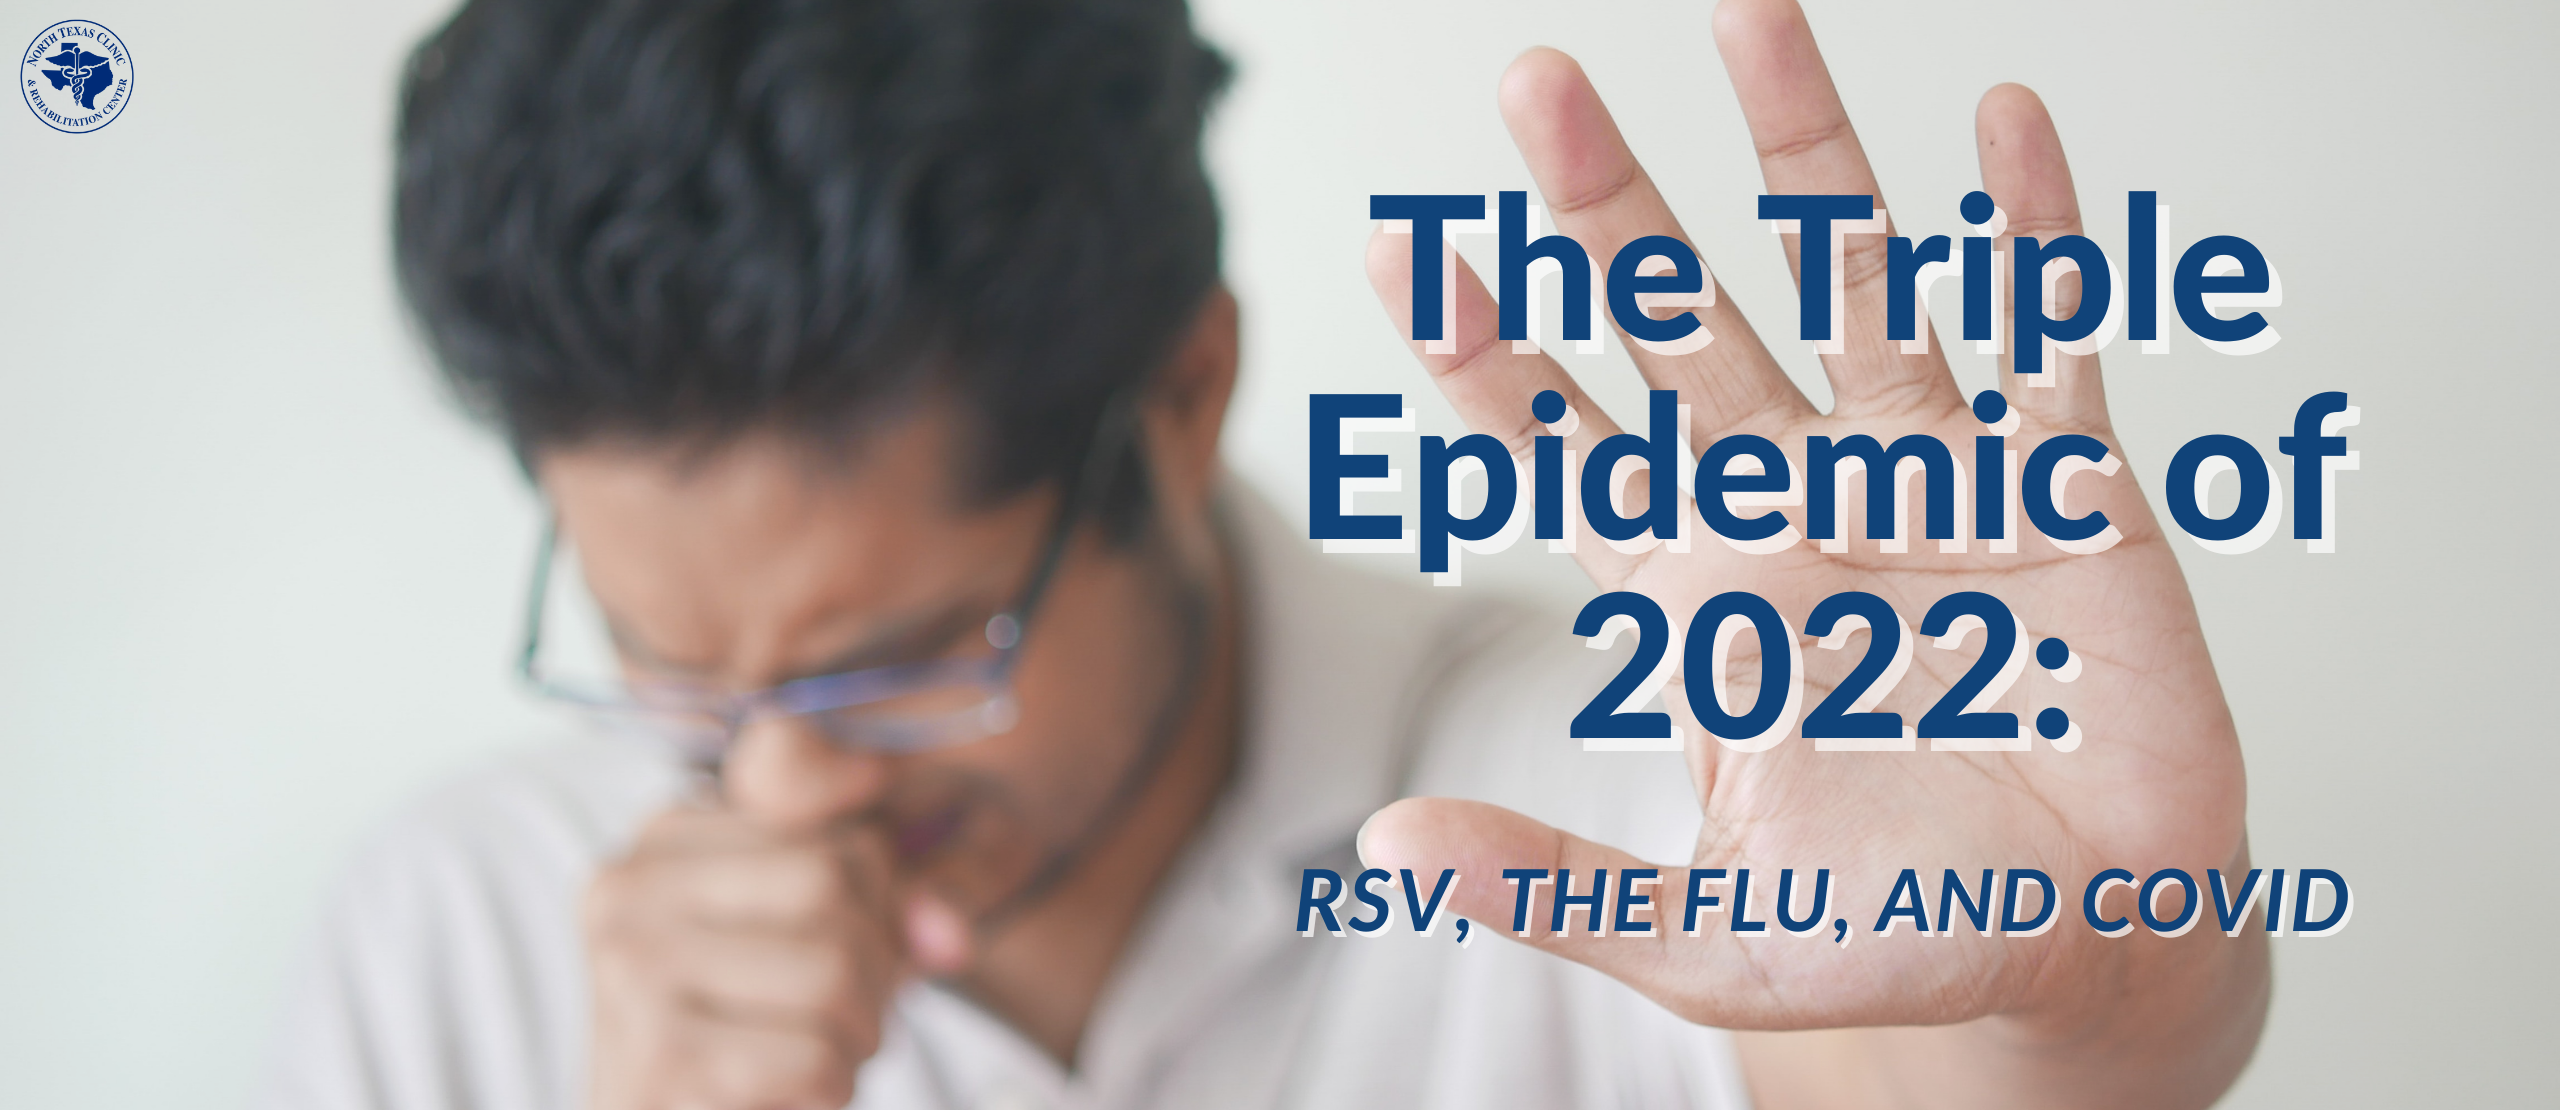 The Triple Epidemic of 2022-23